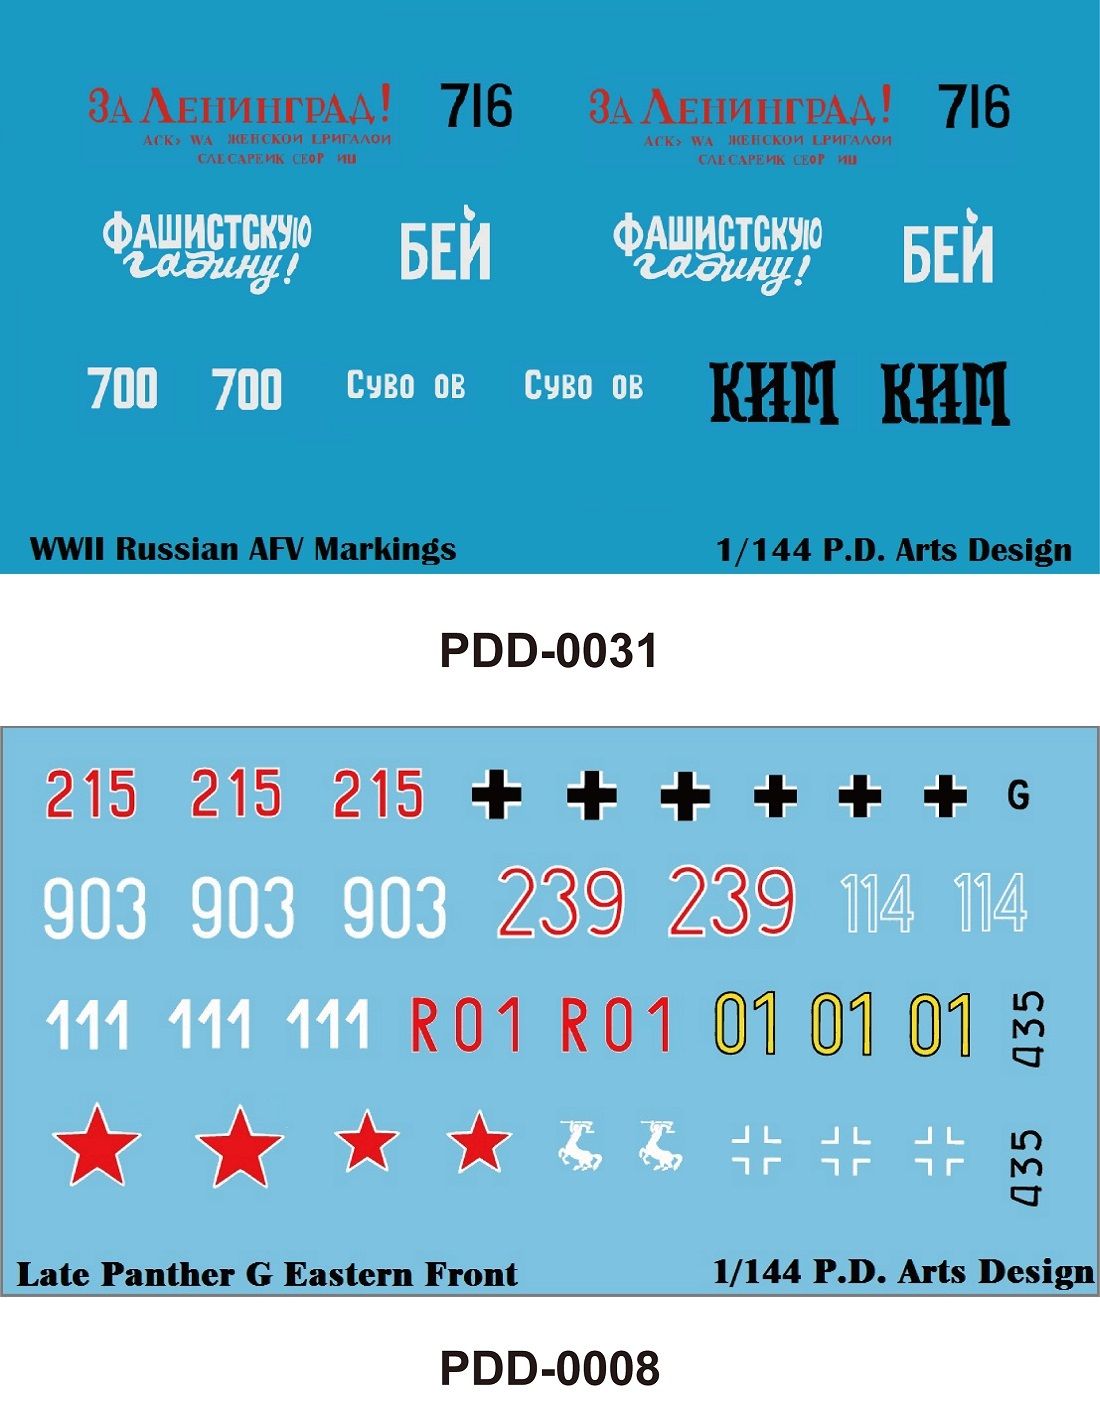 Late Panther G Eatern Front Decal & Russian AFV Decals 1